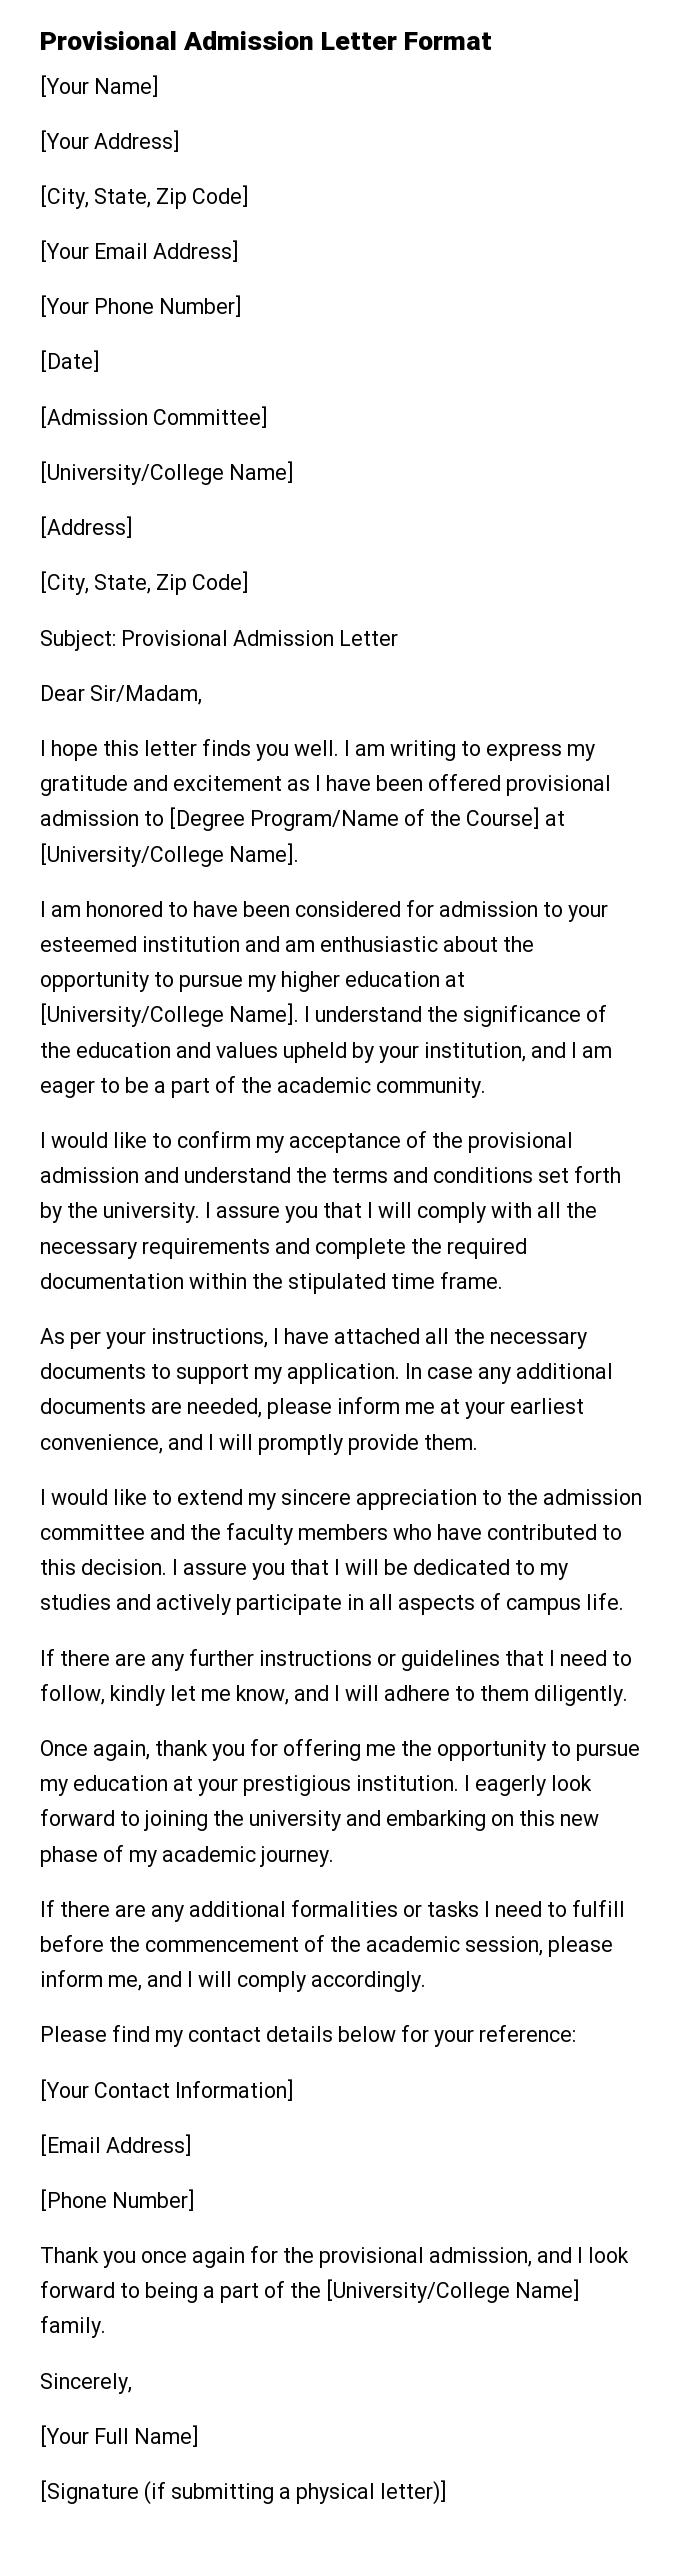 Provisional Admission Letter Format